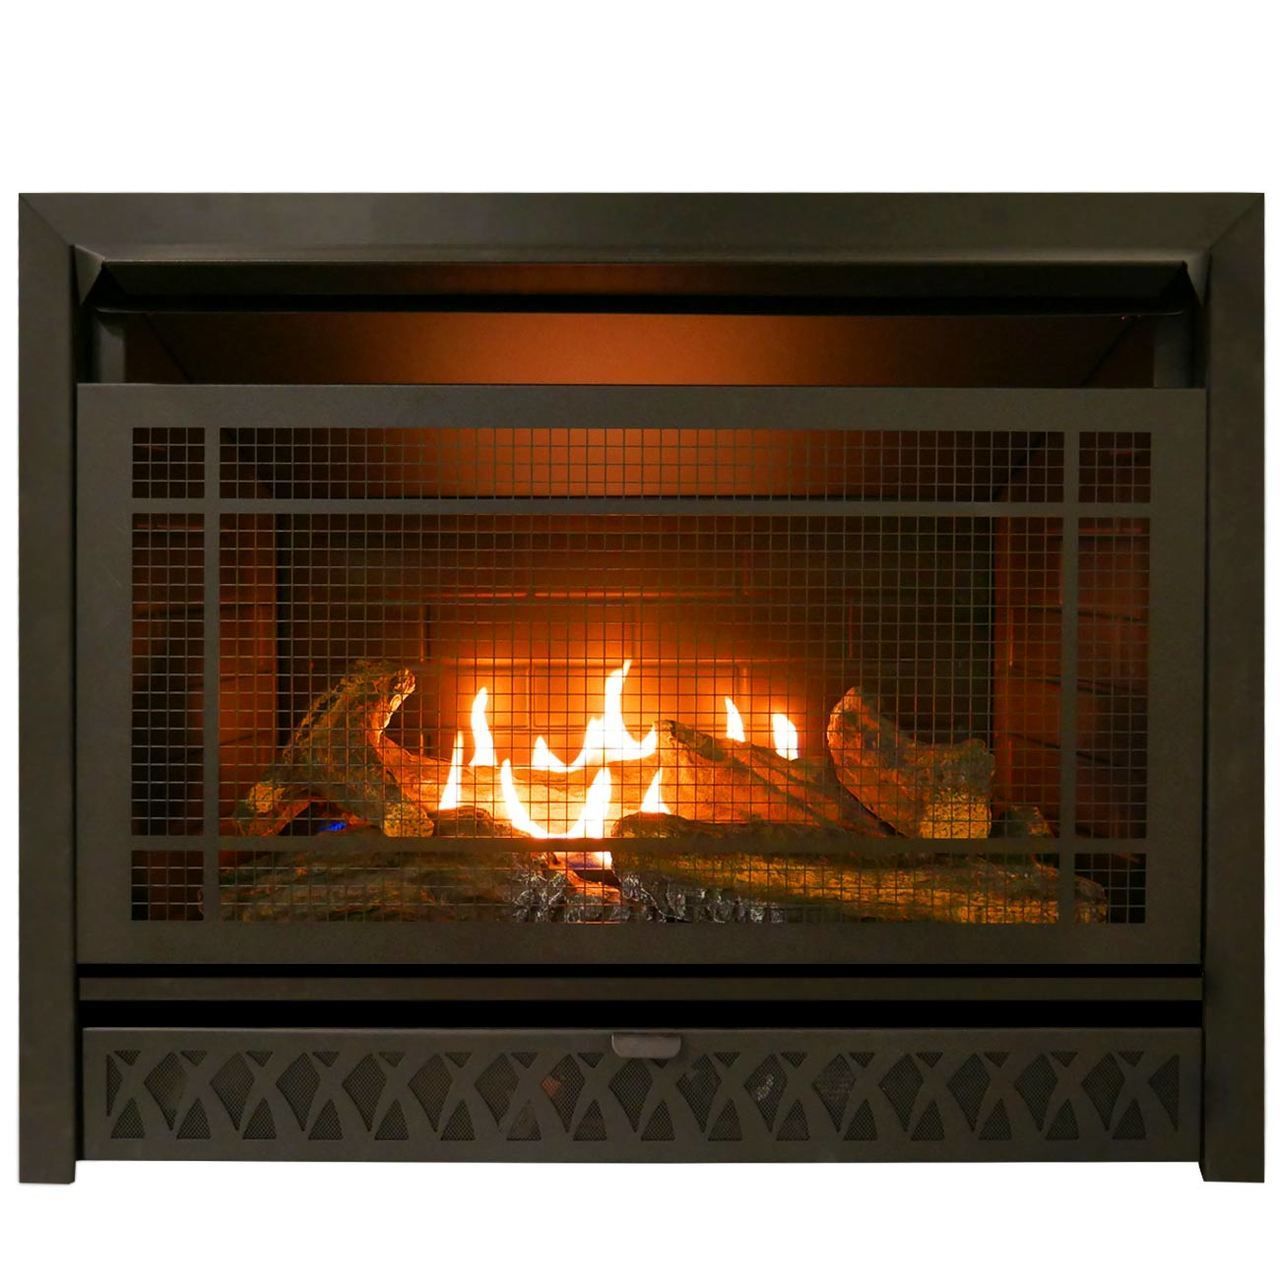 Ventless Lp Gas Fireplace Unique Pro Fireplaces 29 In Ventless Dual Fuel Firebox Insert